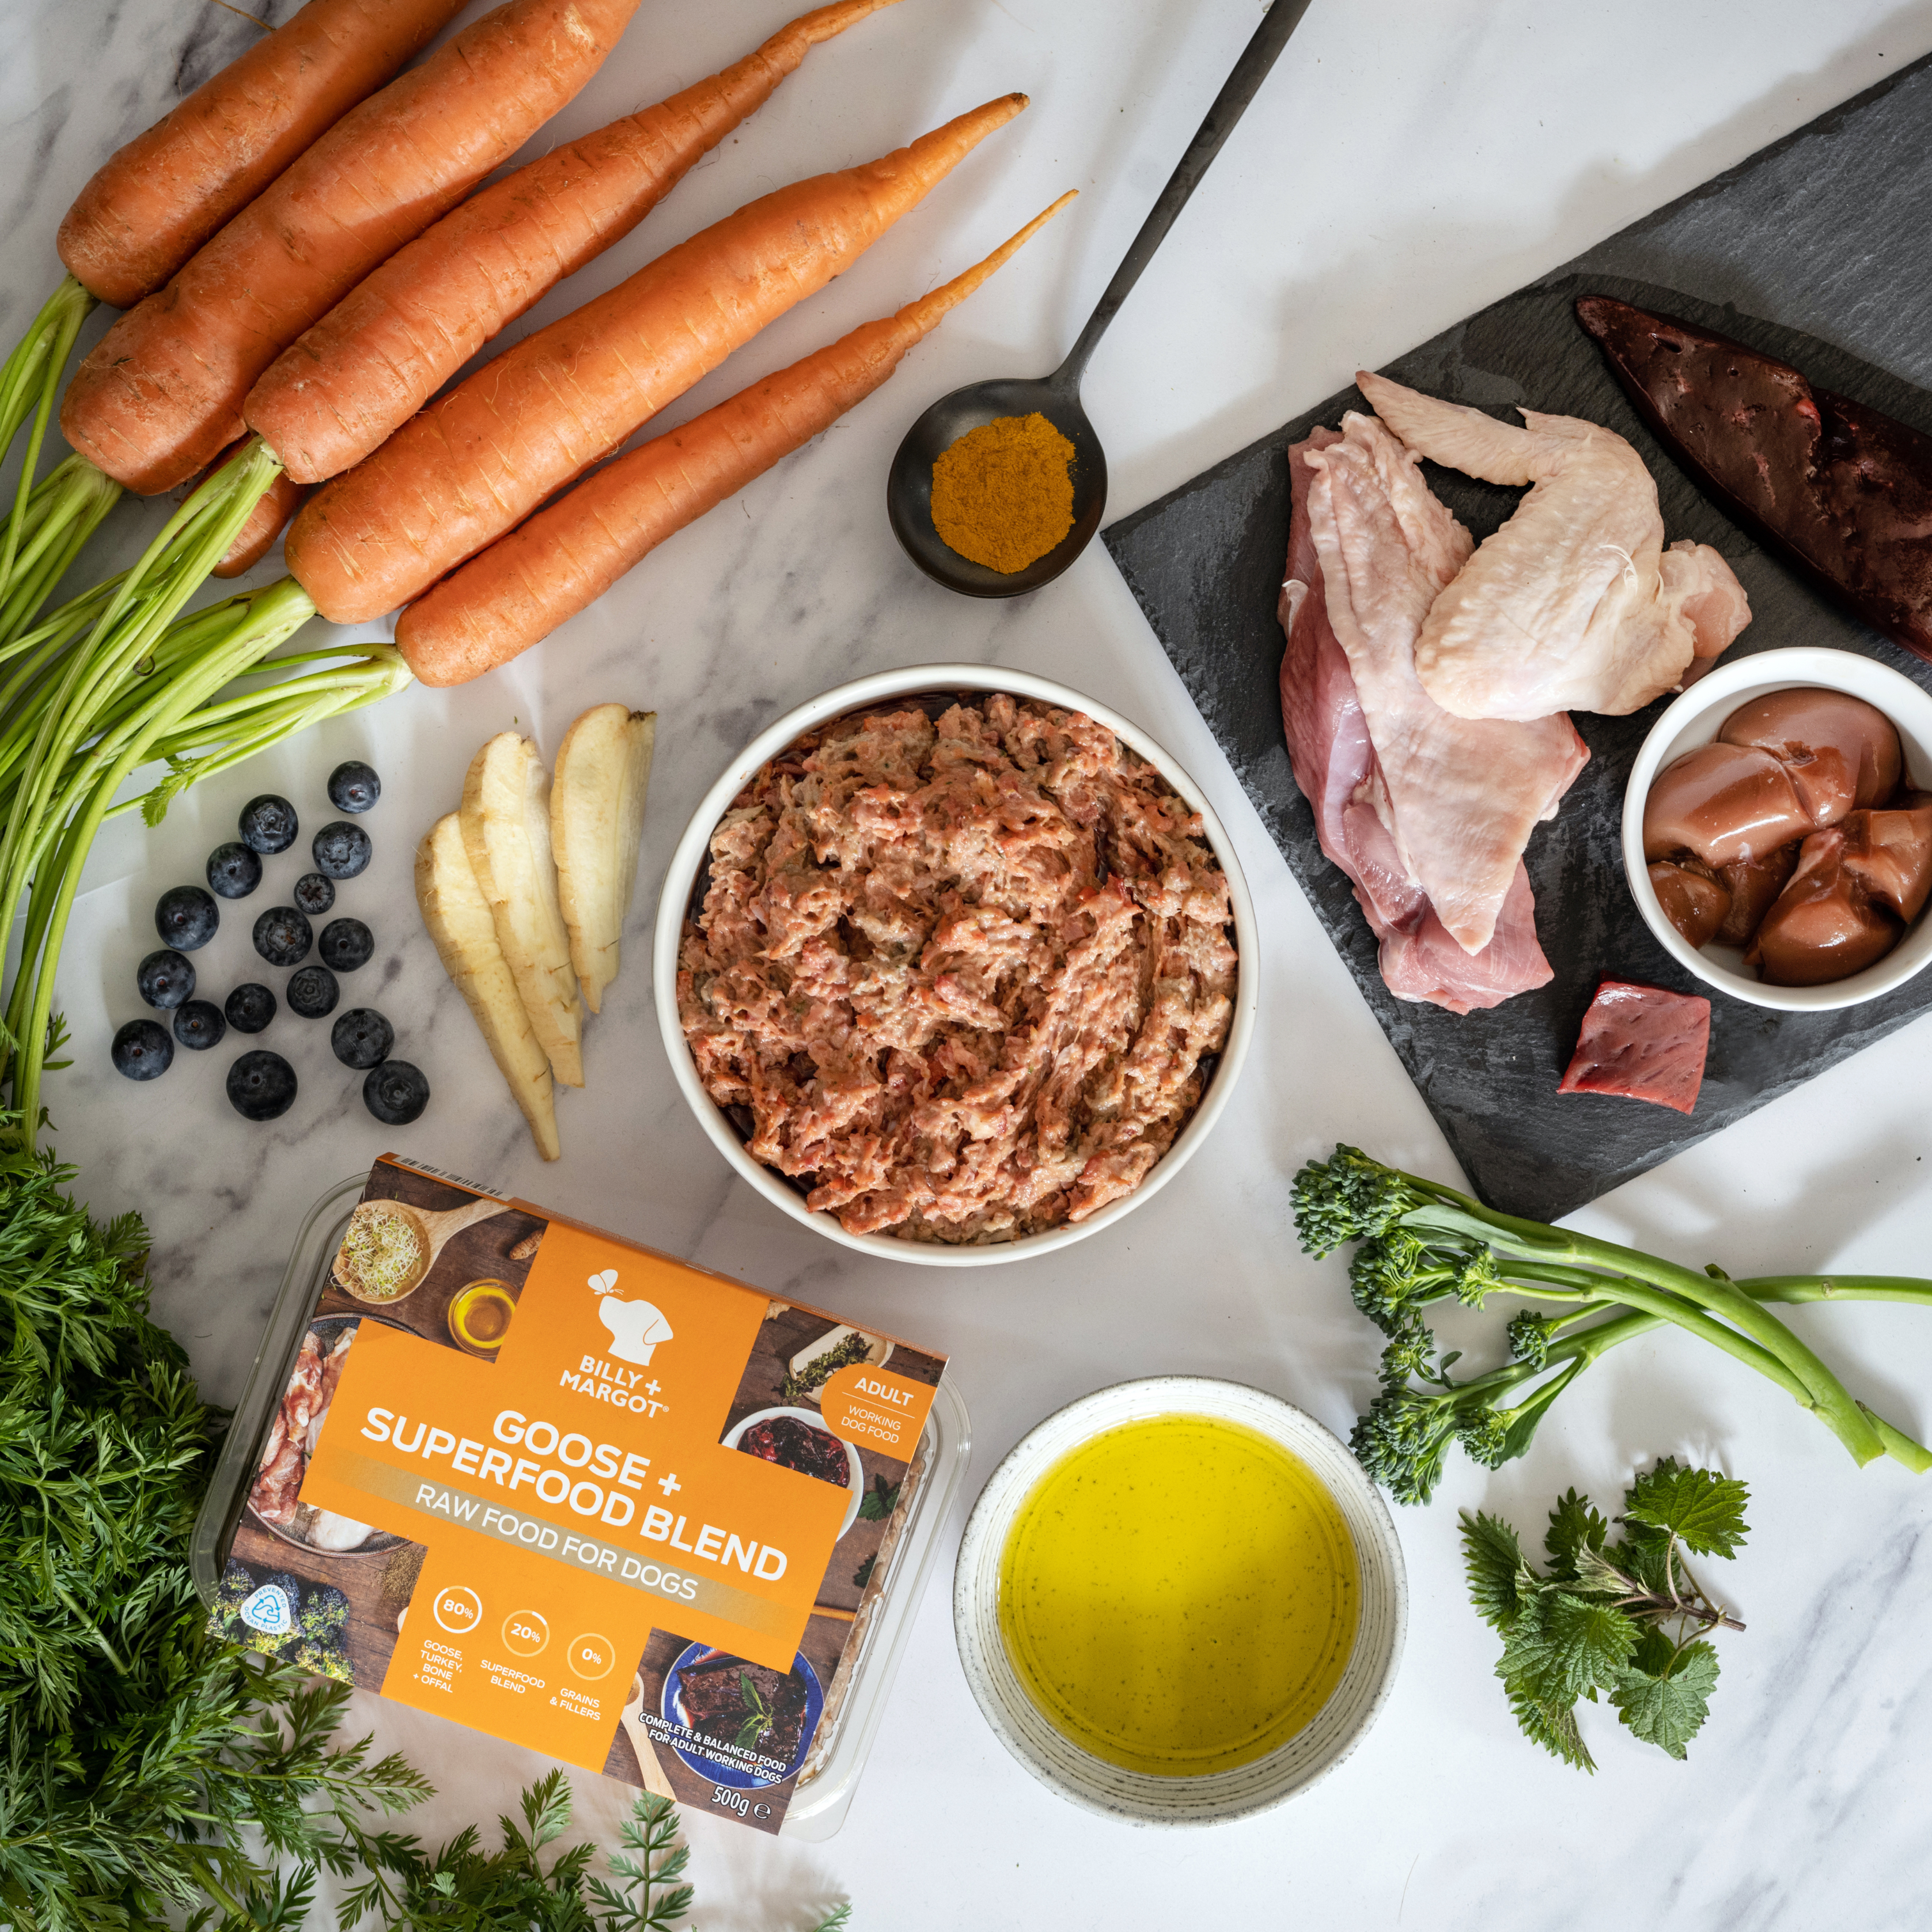 delicious goose raw dog food with 80% meat. bone and offal with seasonal vegetables and a superfood blend. Complete and balanced natural fresh raw dog food